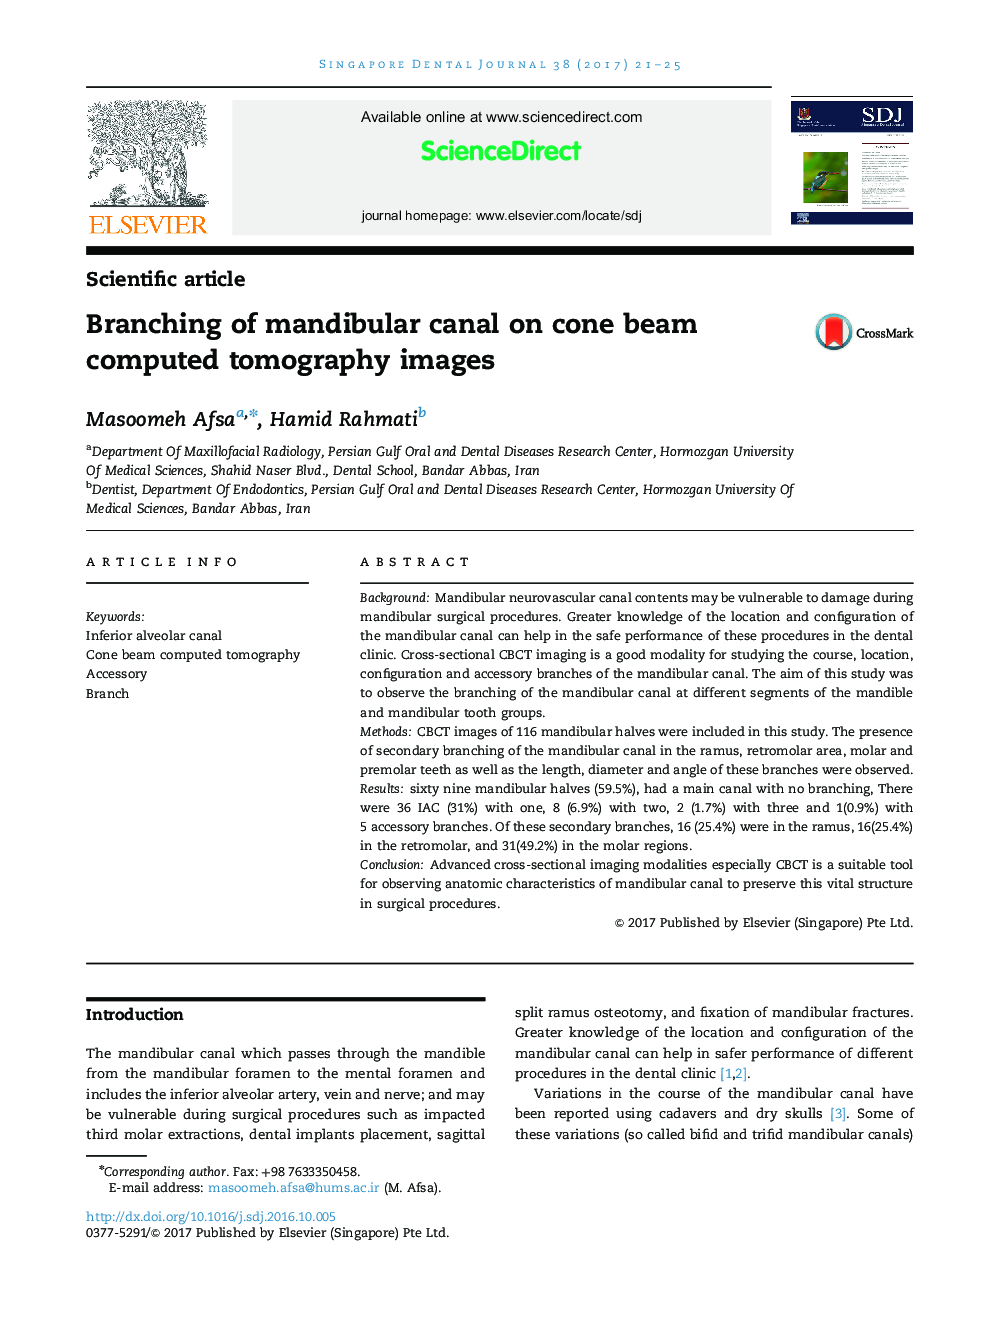 Branching of mandibular canal on cone beam computed tomography images